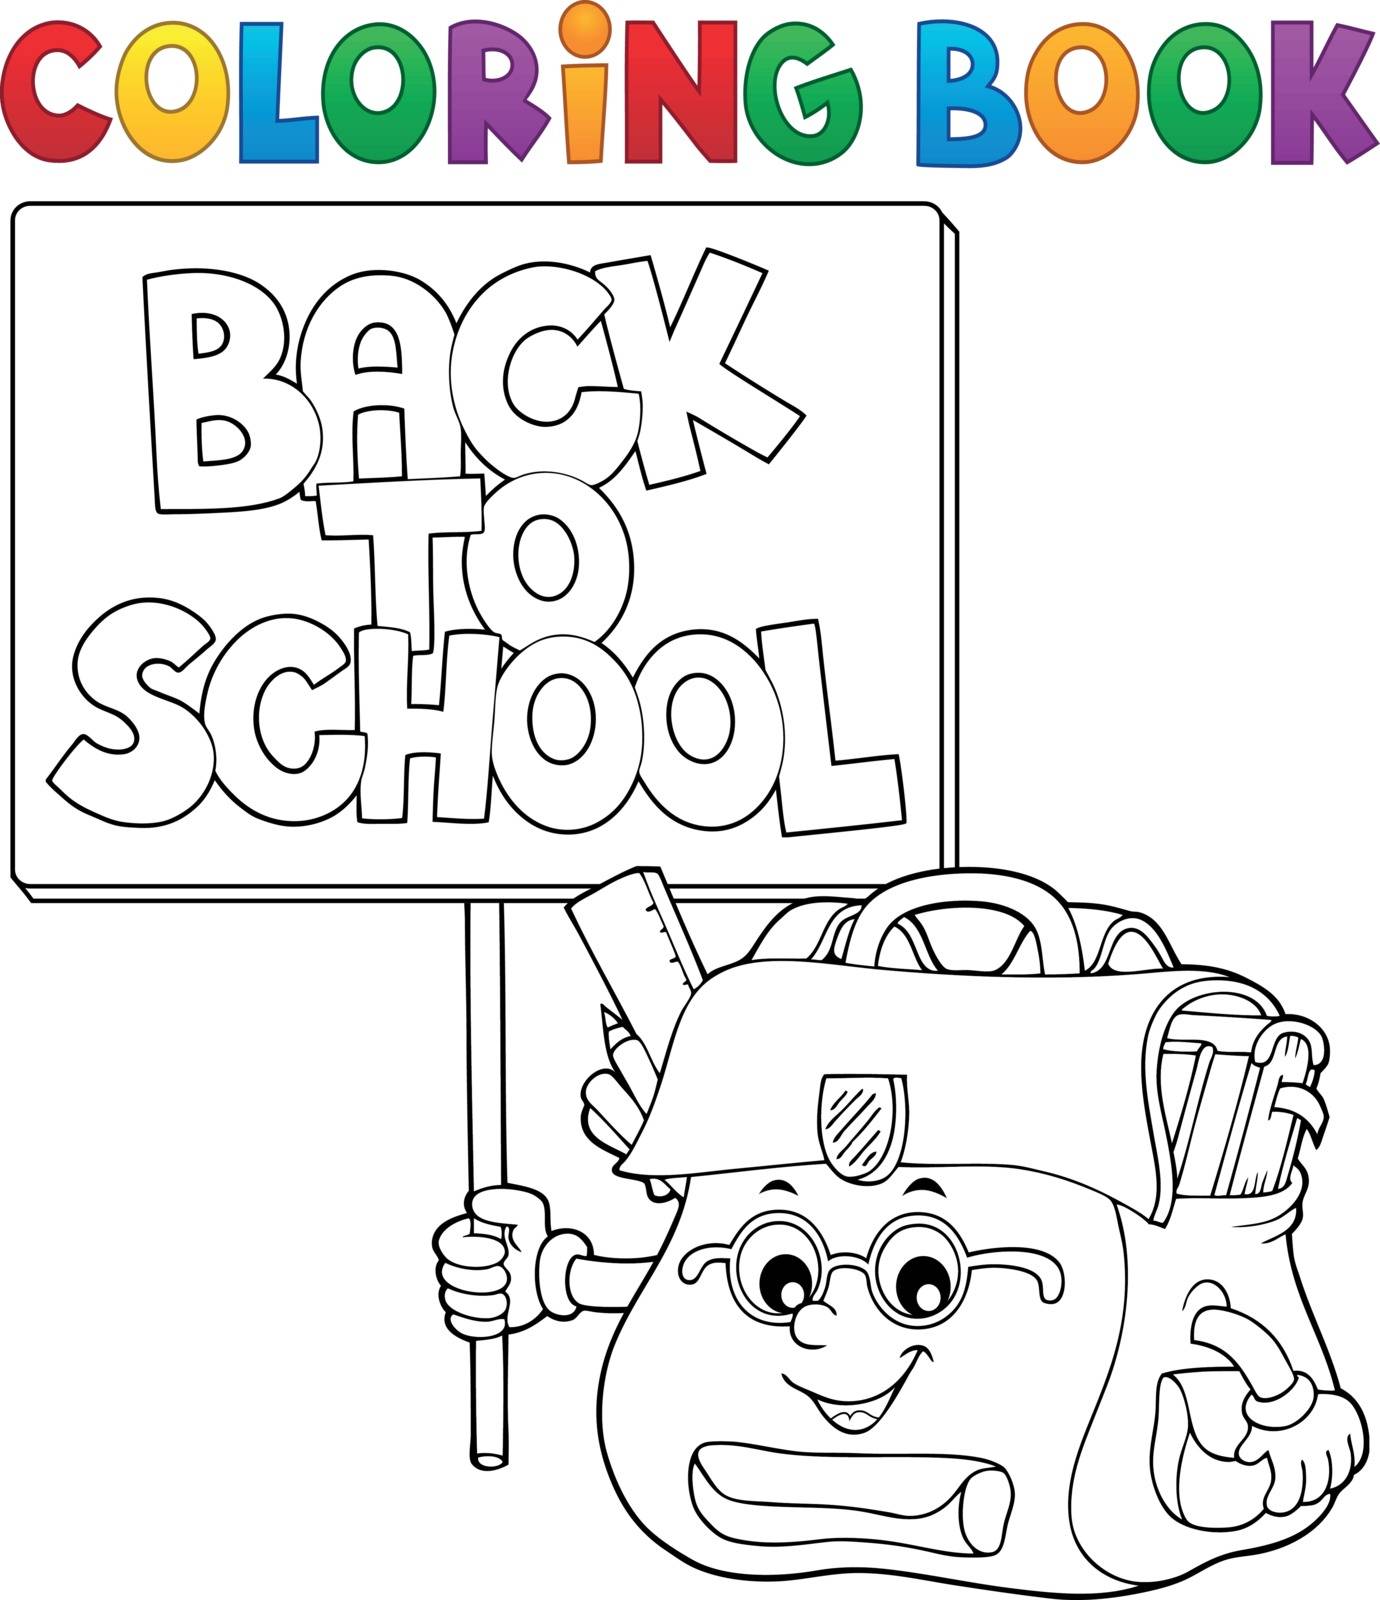 Coloring book schoolbag with sign by clairev